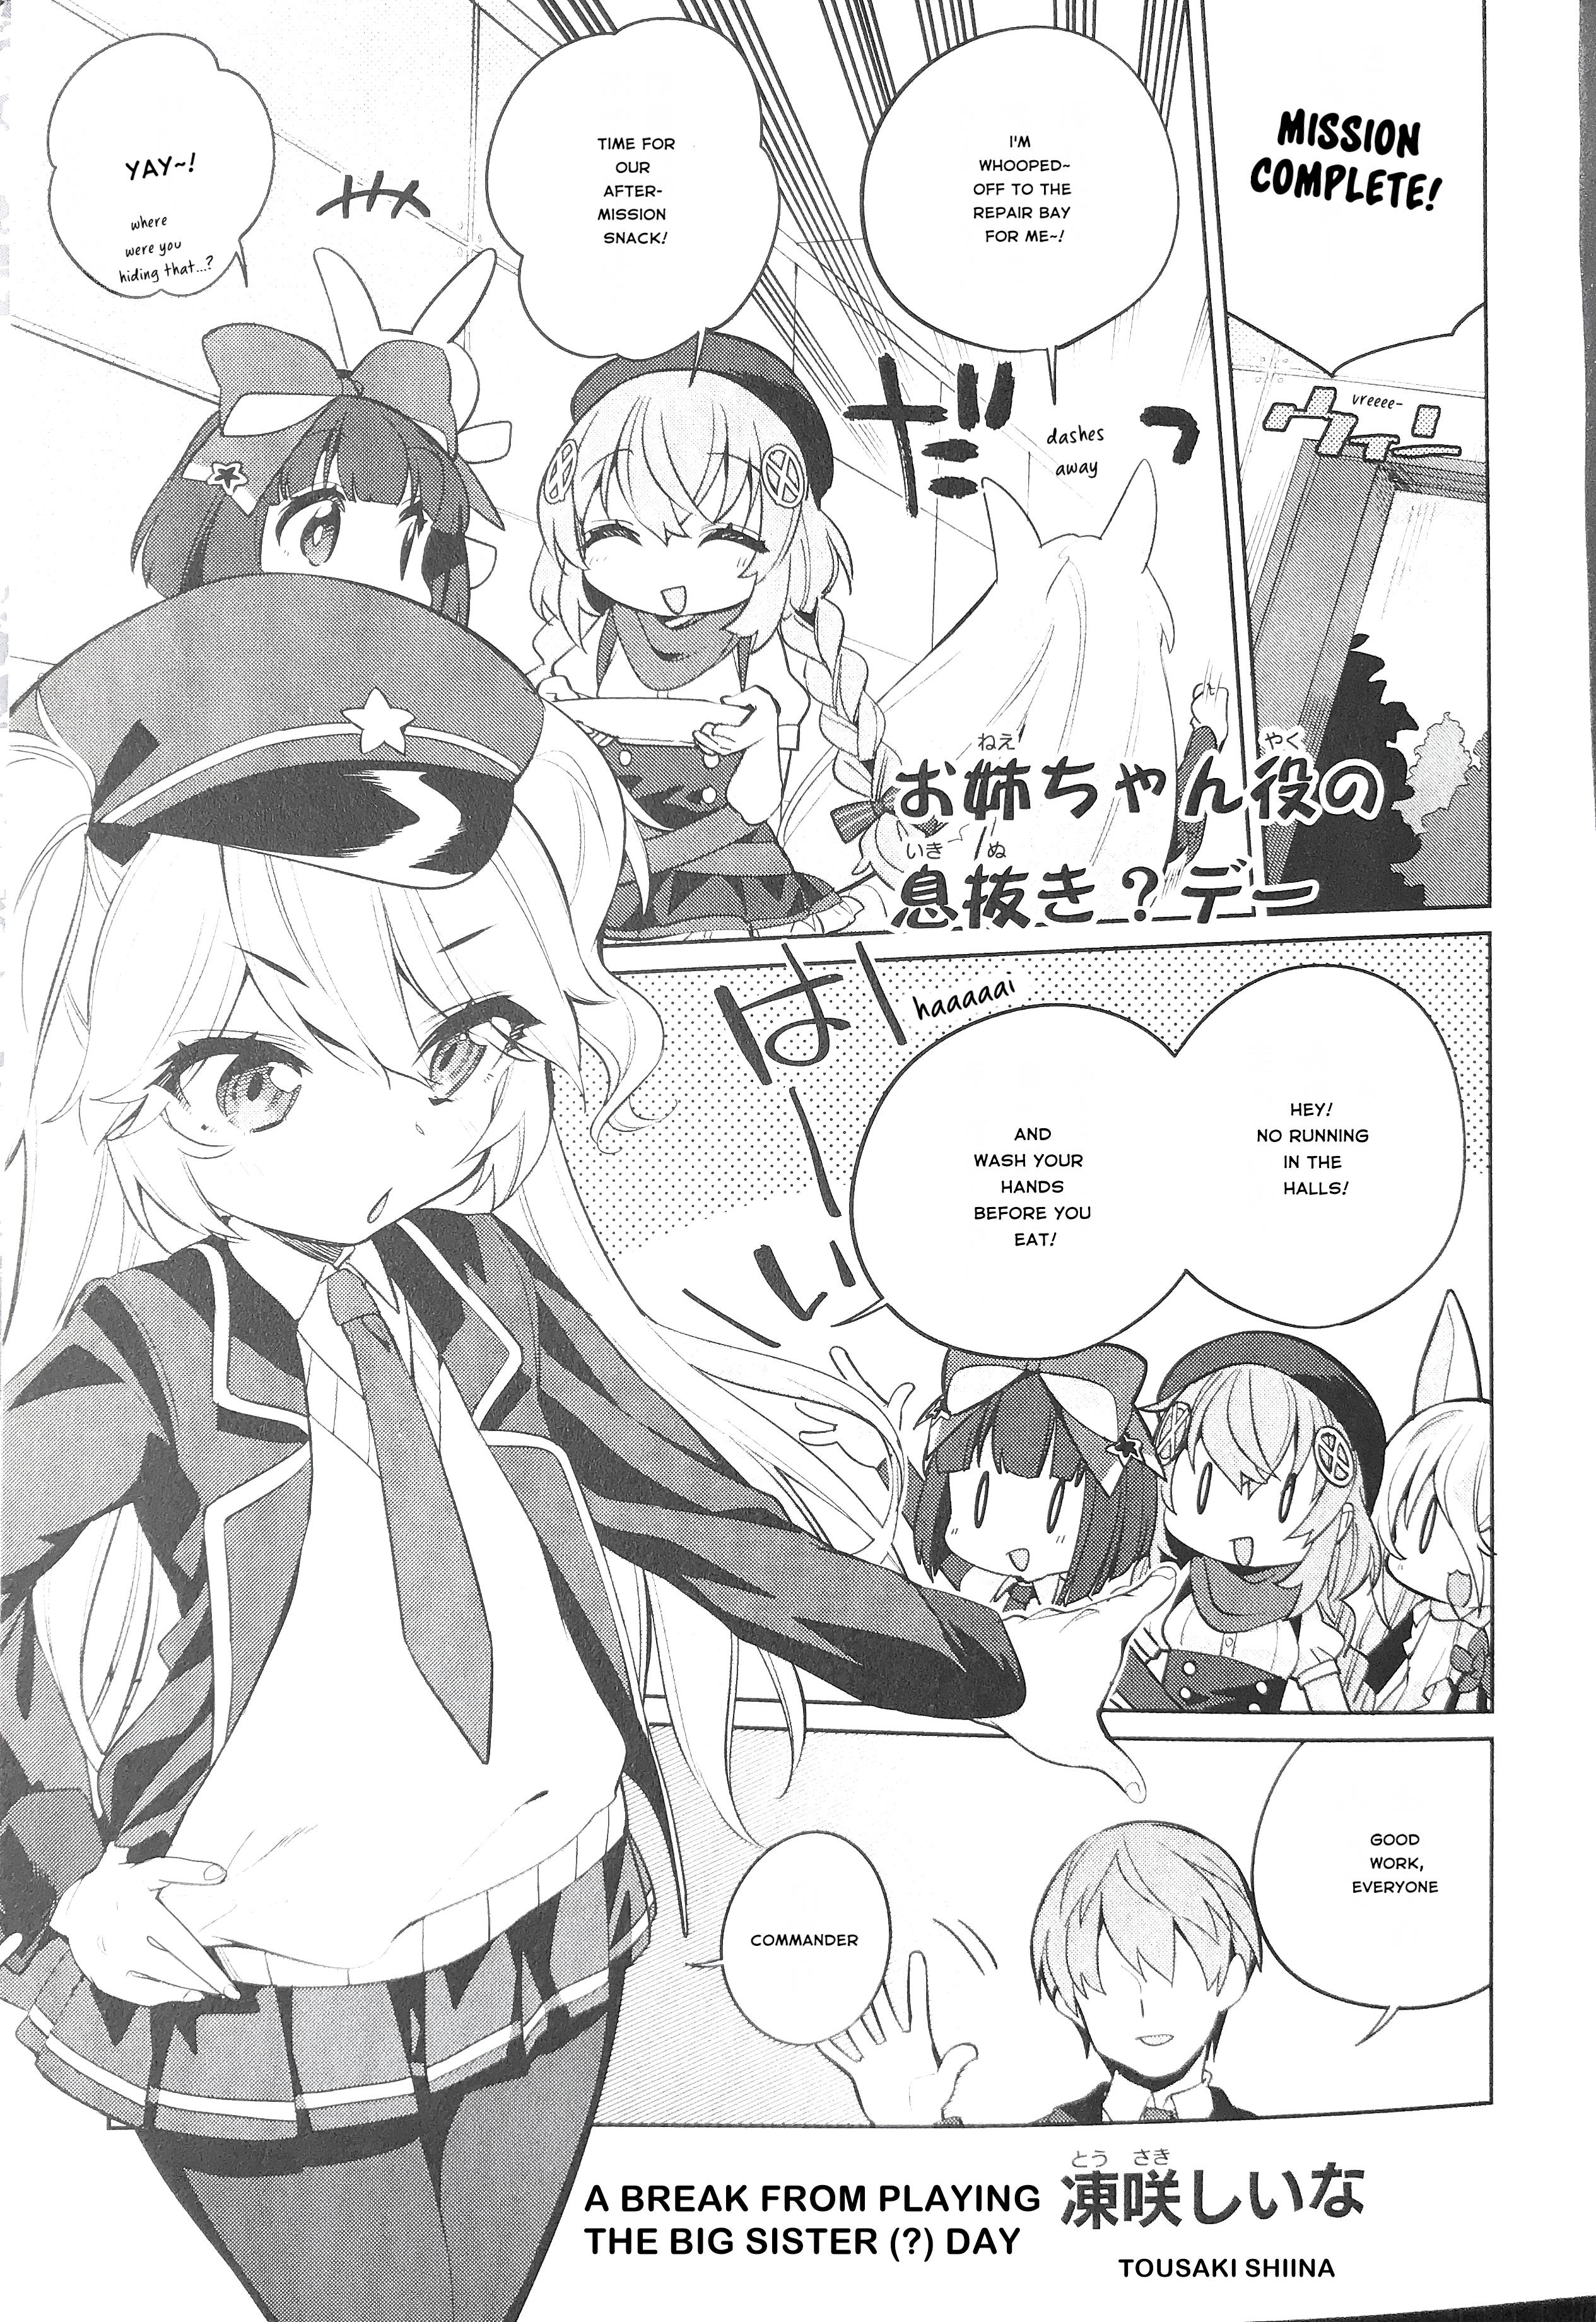 Dolls Frontline Comic Anthology - DNA Media 2019 - Chapter 31178 - A Break from Playing the Big Sister (?) Day - Image 1